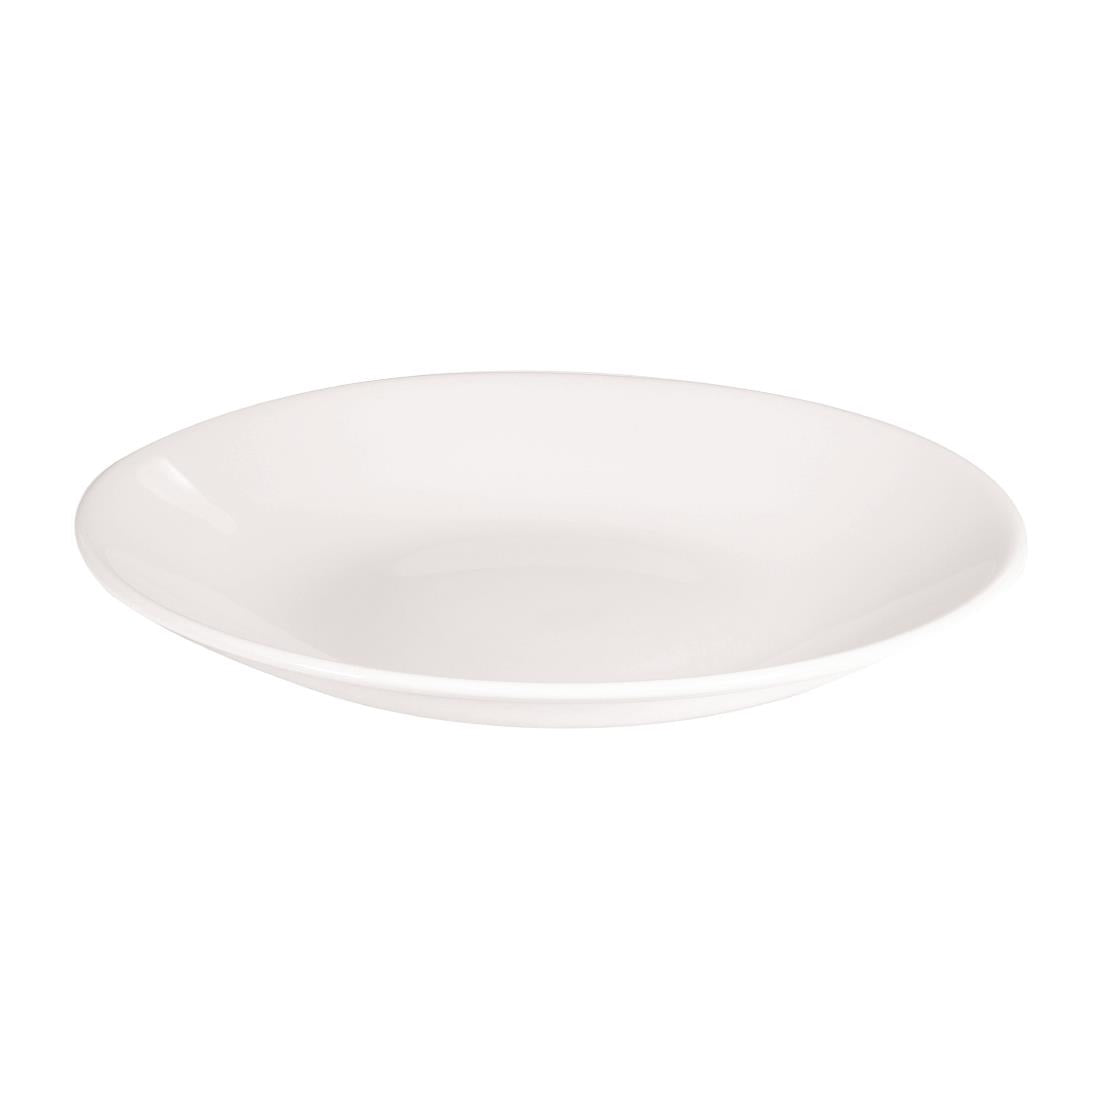 DA737 Churchill Profile Deep Coupe Plates 255mm (Pack of 12) JD Catering Equipment Solutions Ltd